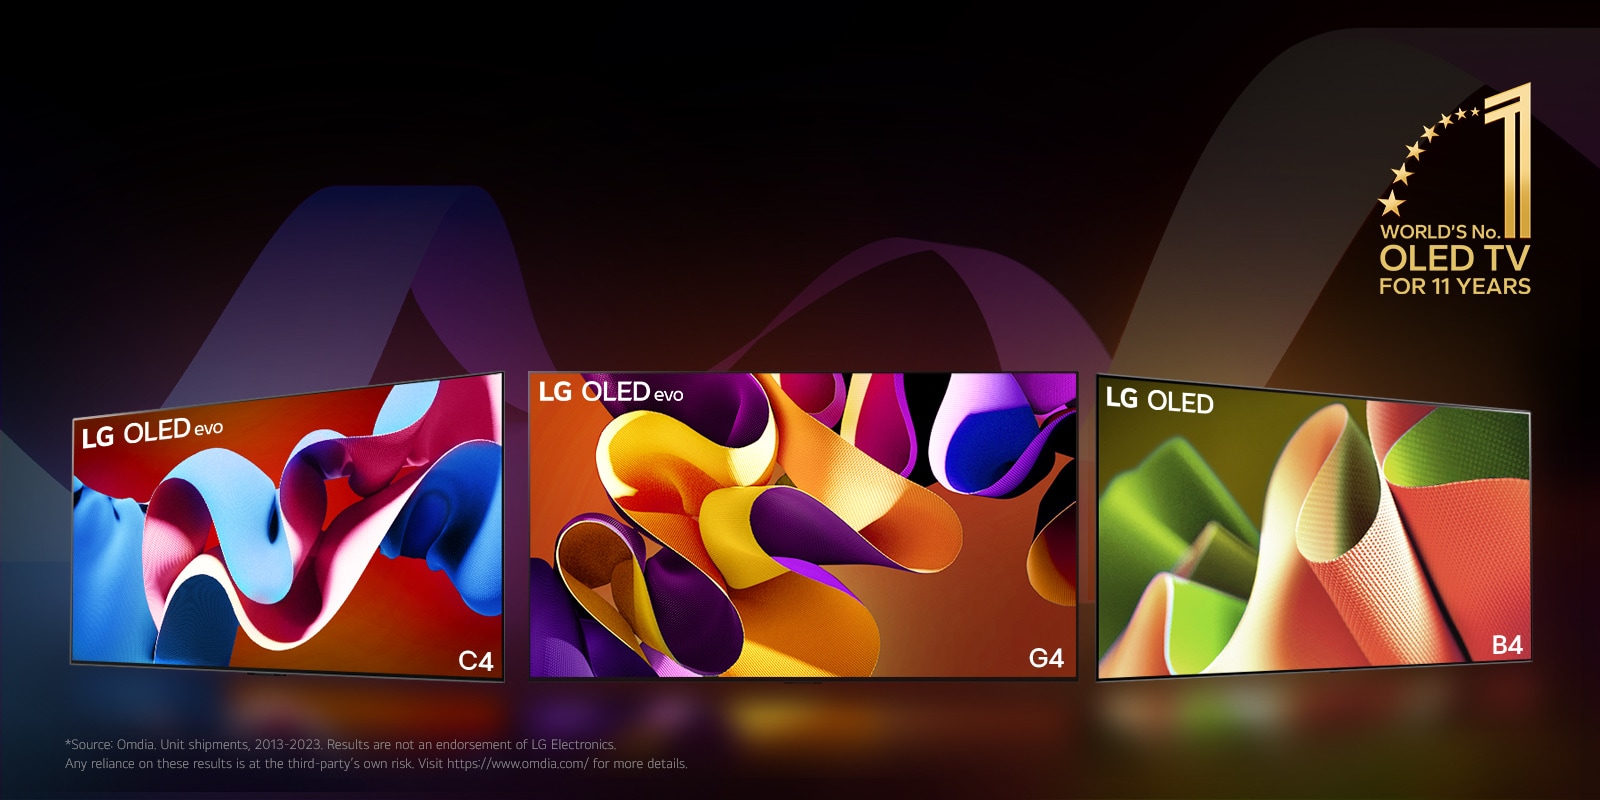 LG OLED evo TV C4, evo G4, and B4 standing in a line against a black backdrop with subtle swirls of color. The "World's number 1 OLED TV for 11 Years" emblem is in the image.  A disclaimer reads: "Source: Omdia. Unit shipments, 2013 to 2023. Results are not an endorsement of LG Electronics. Any reliance on these results is at the third party’s own risk. Visit https://www.omdia.com/ for more details."